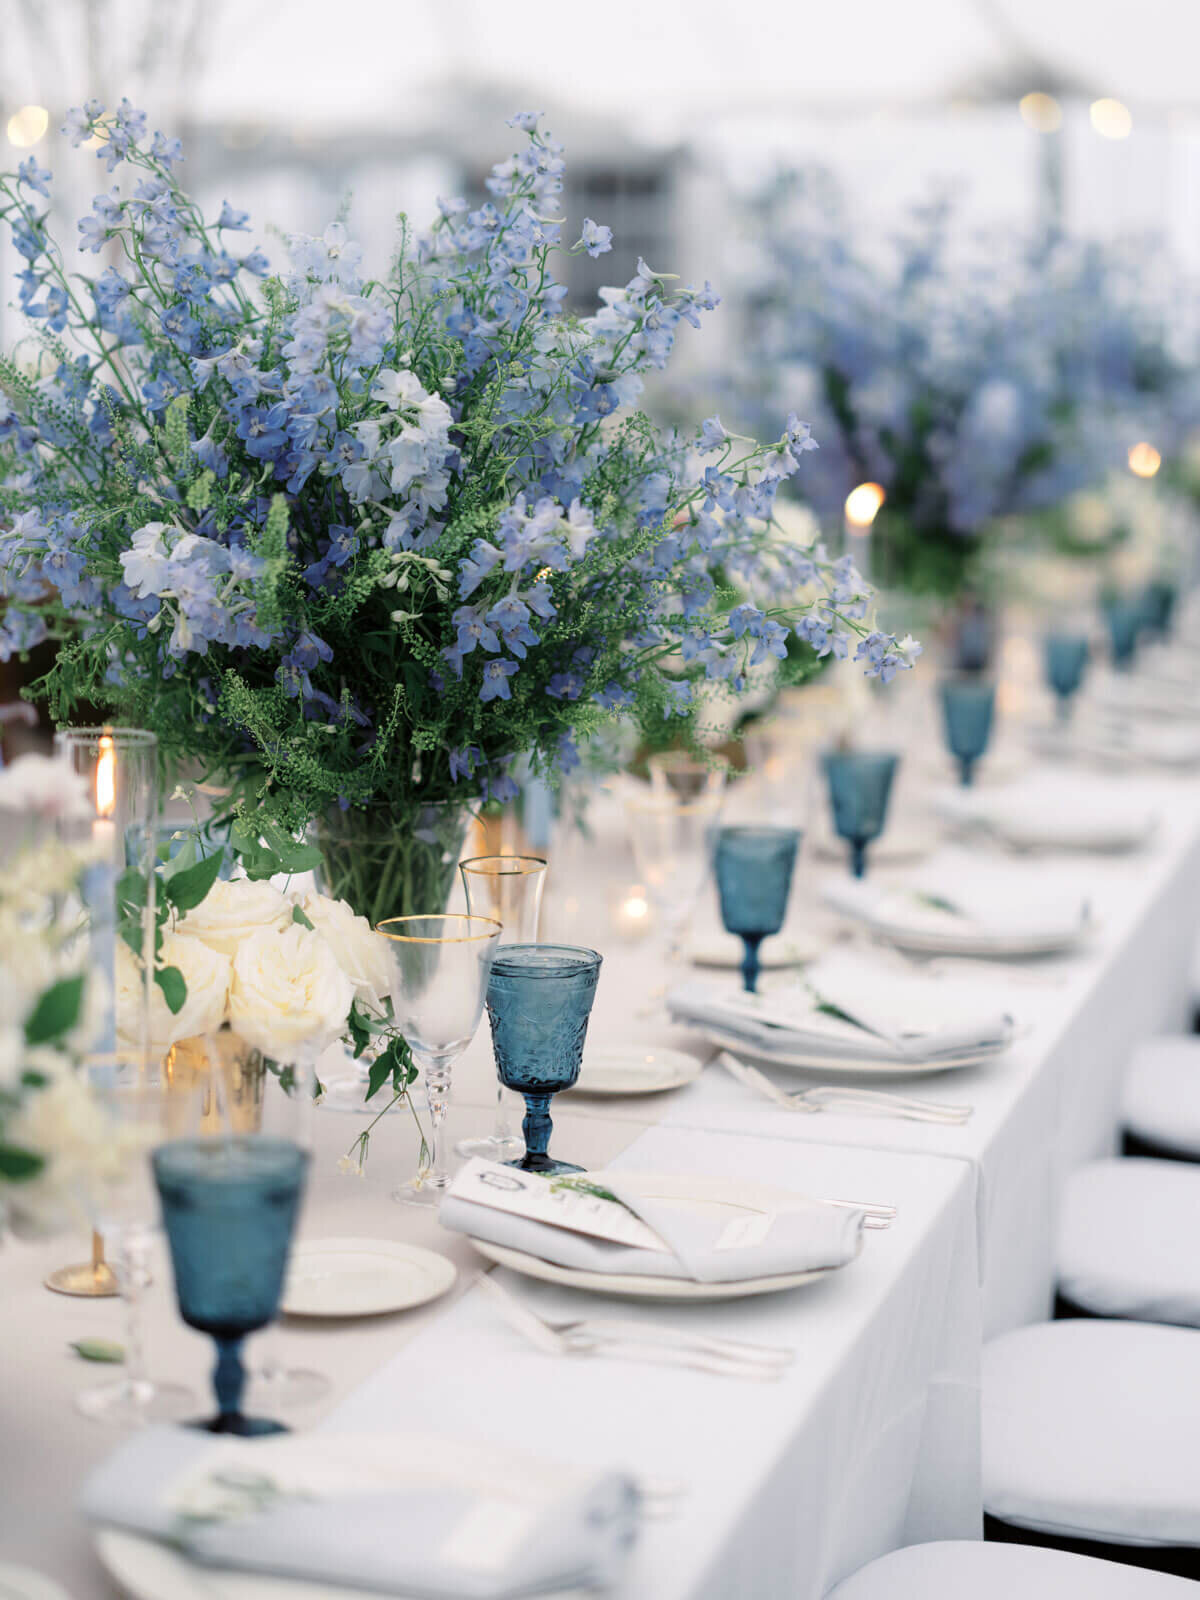 An elegant wedding dining table with pretty blue flower centerpieces and wine glasses at The Lion Rock Farm, CT. Image by Jenny Fu Studio